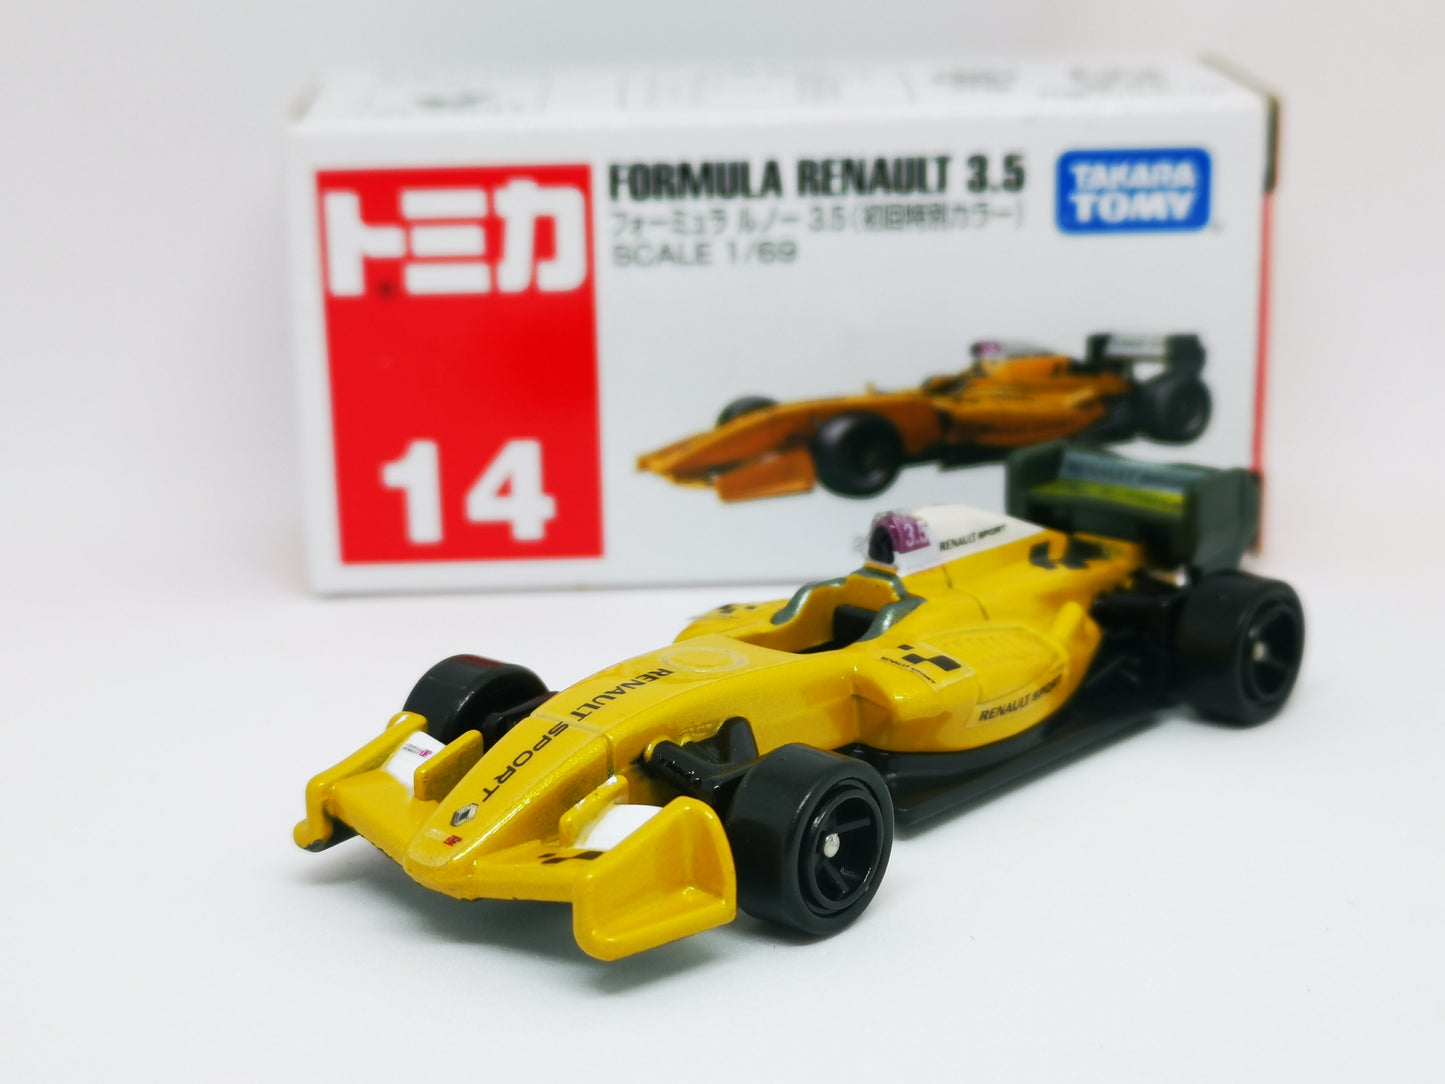 Tomica #14 Formula Renault 3.5 1/69 SCALE Set of Two